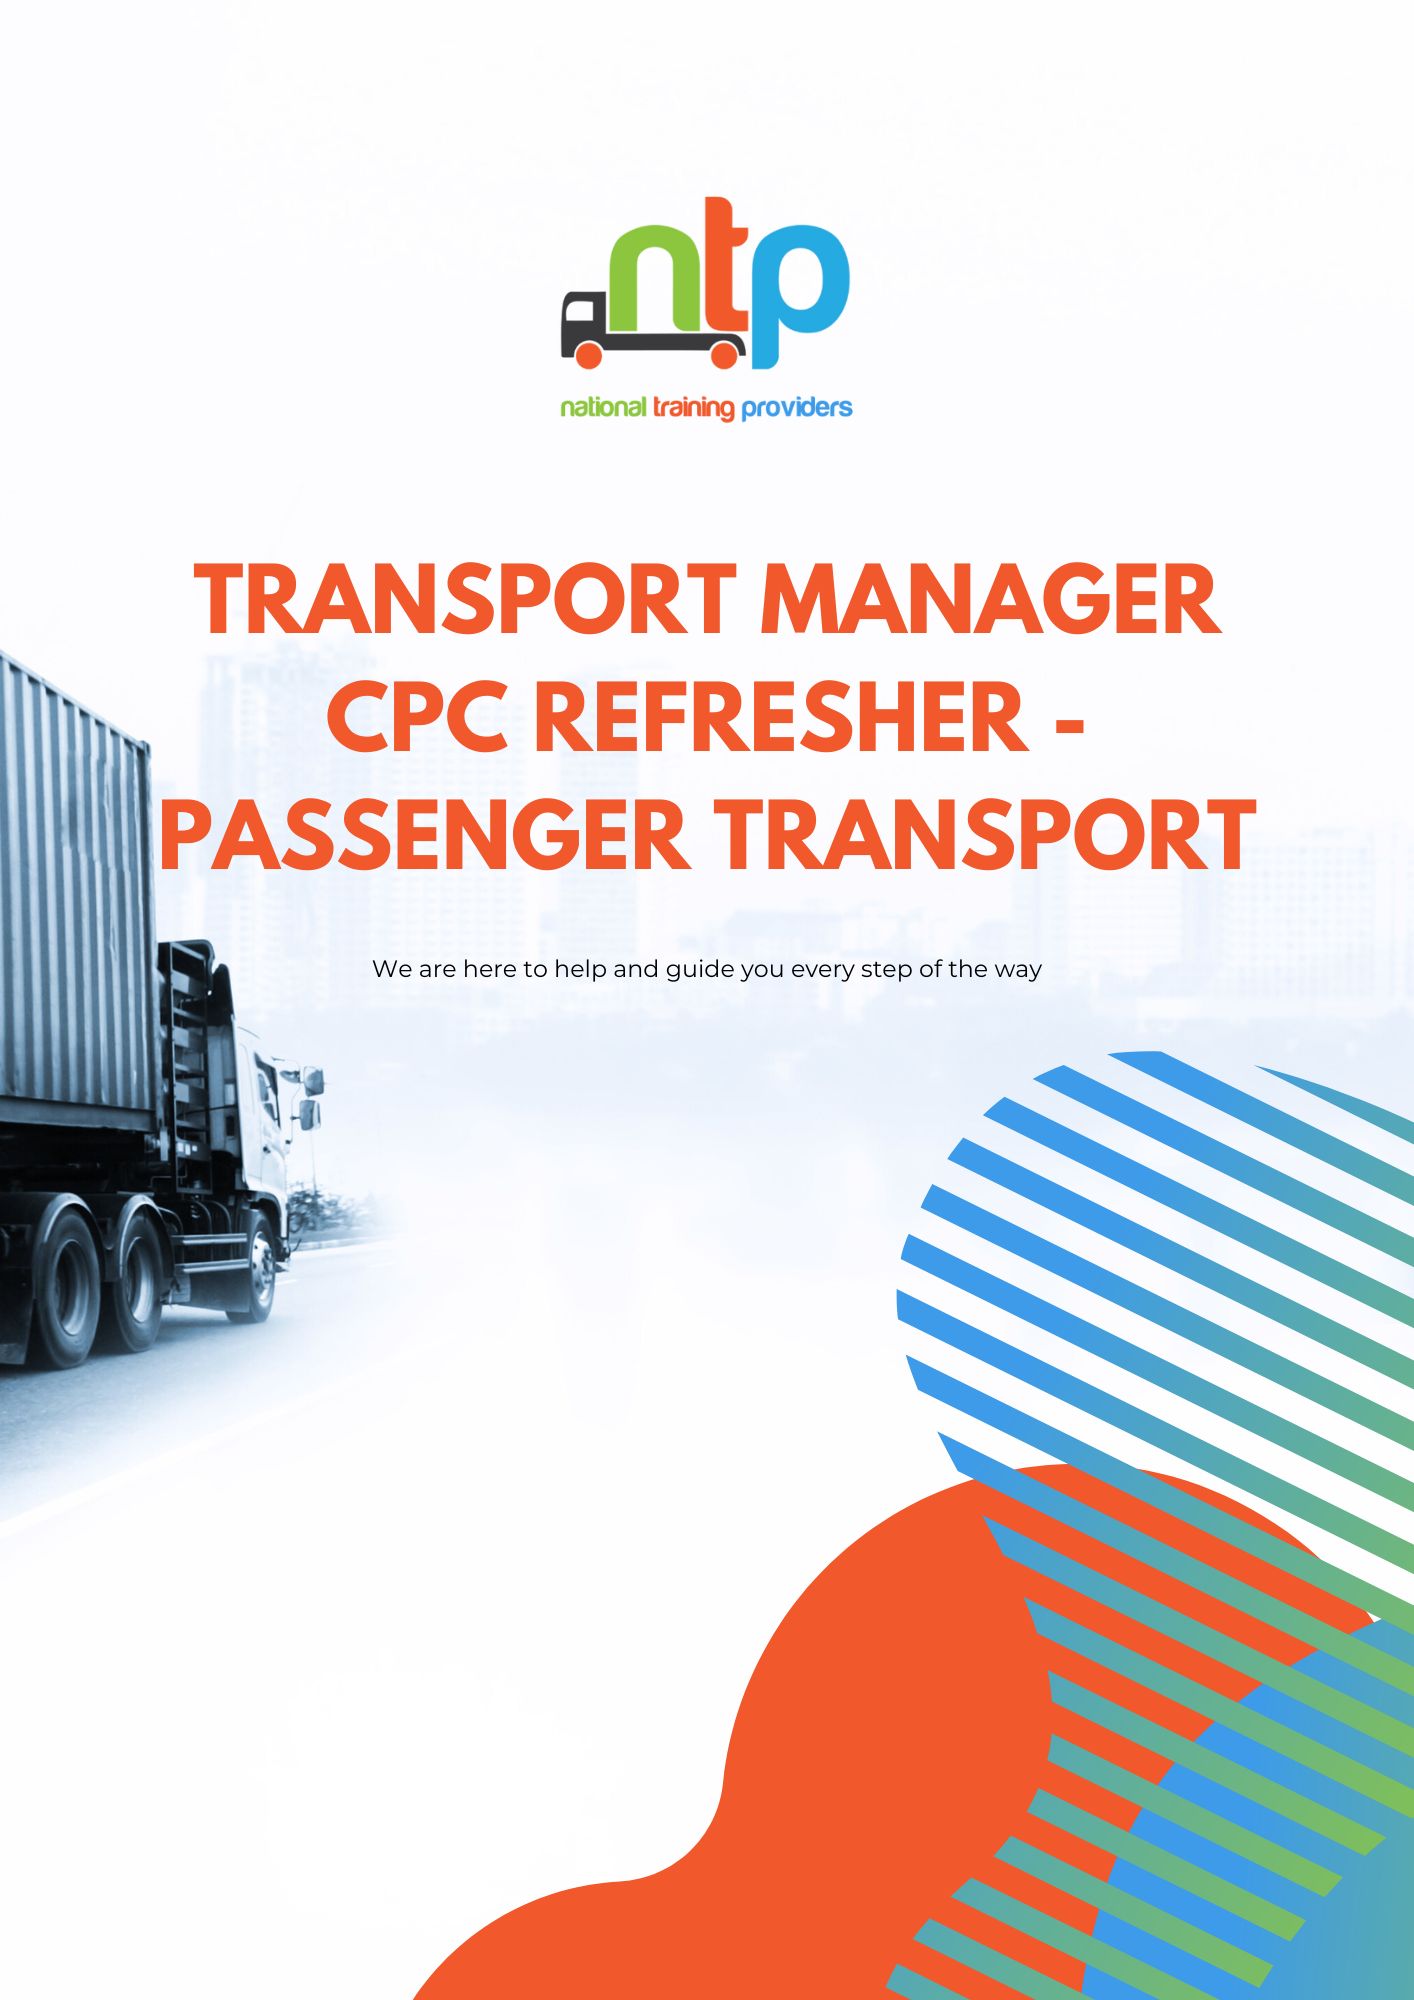 Download the transport manager CPC course guide for passenger transport operations